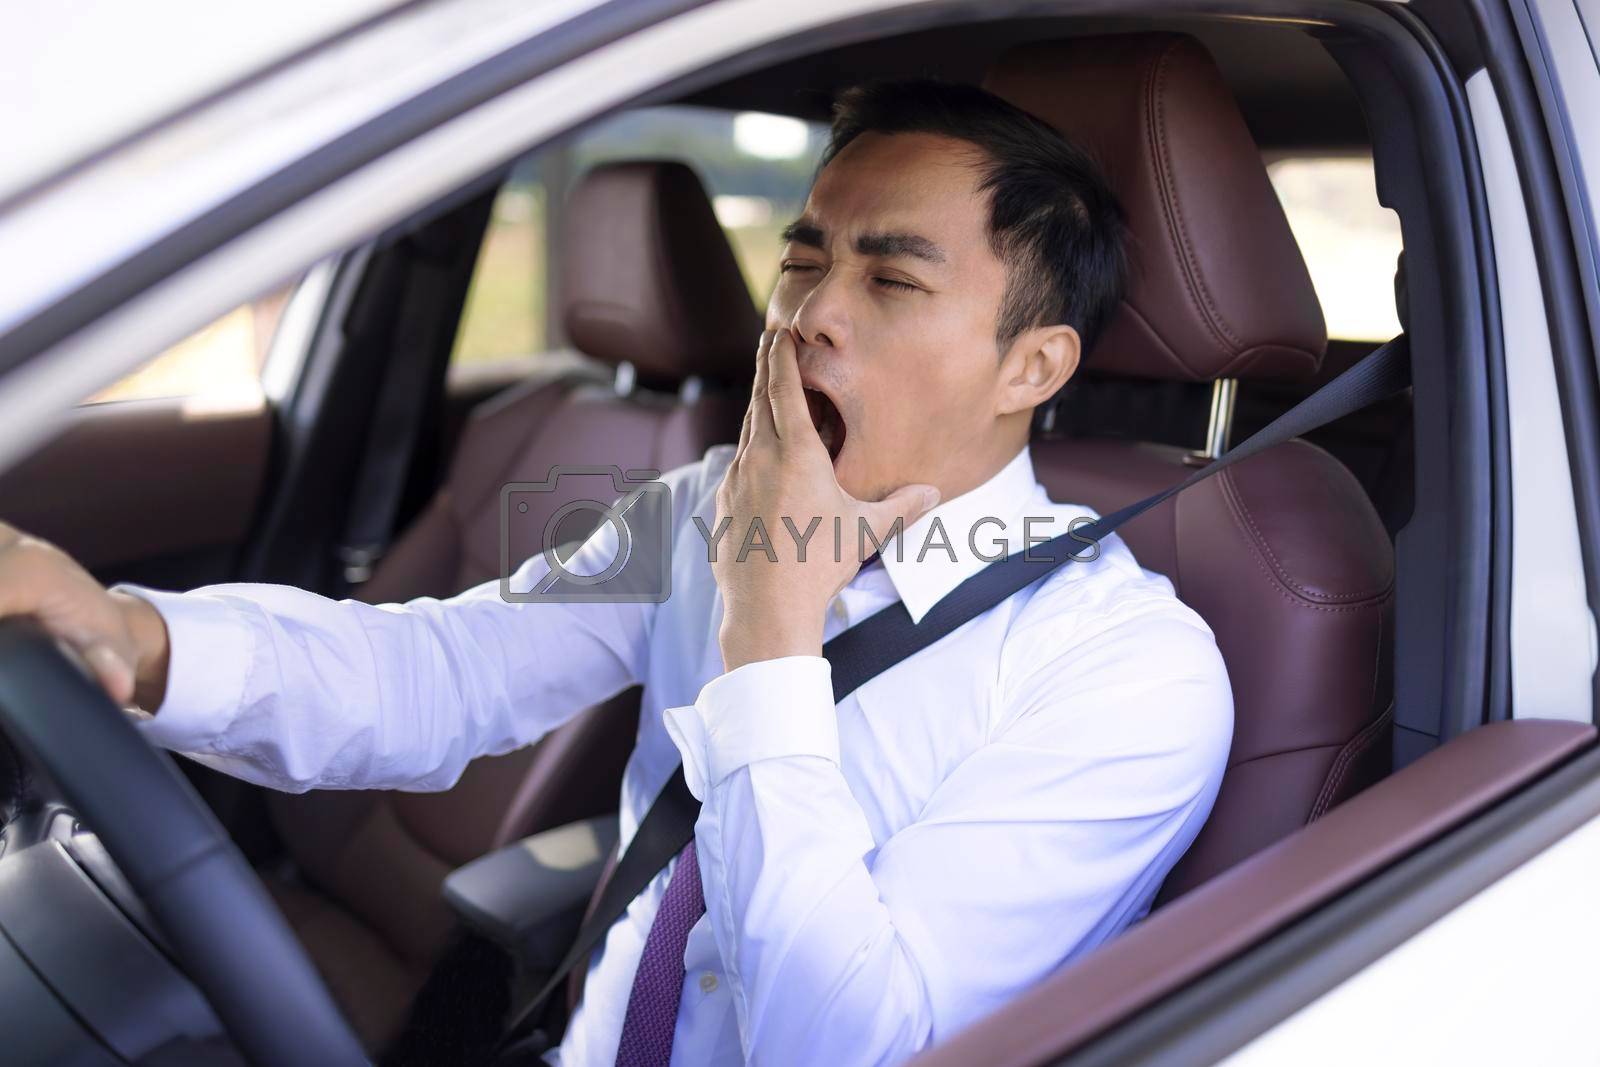 Royalty free image of Business man looks tired yawning while driving the car by tomwang